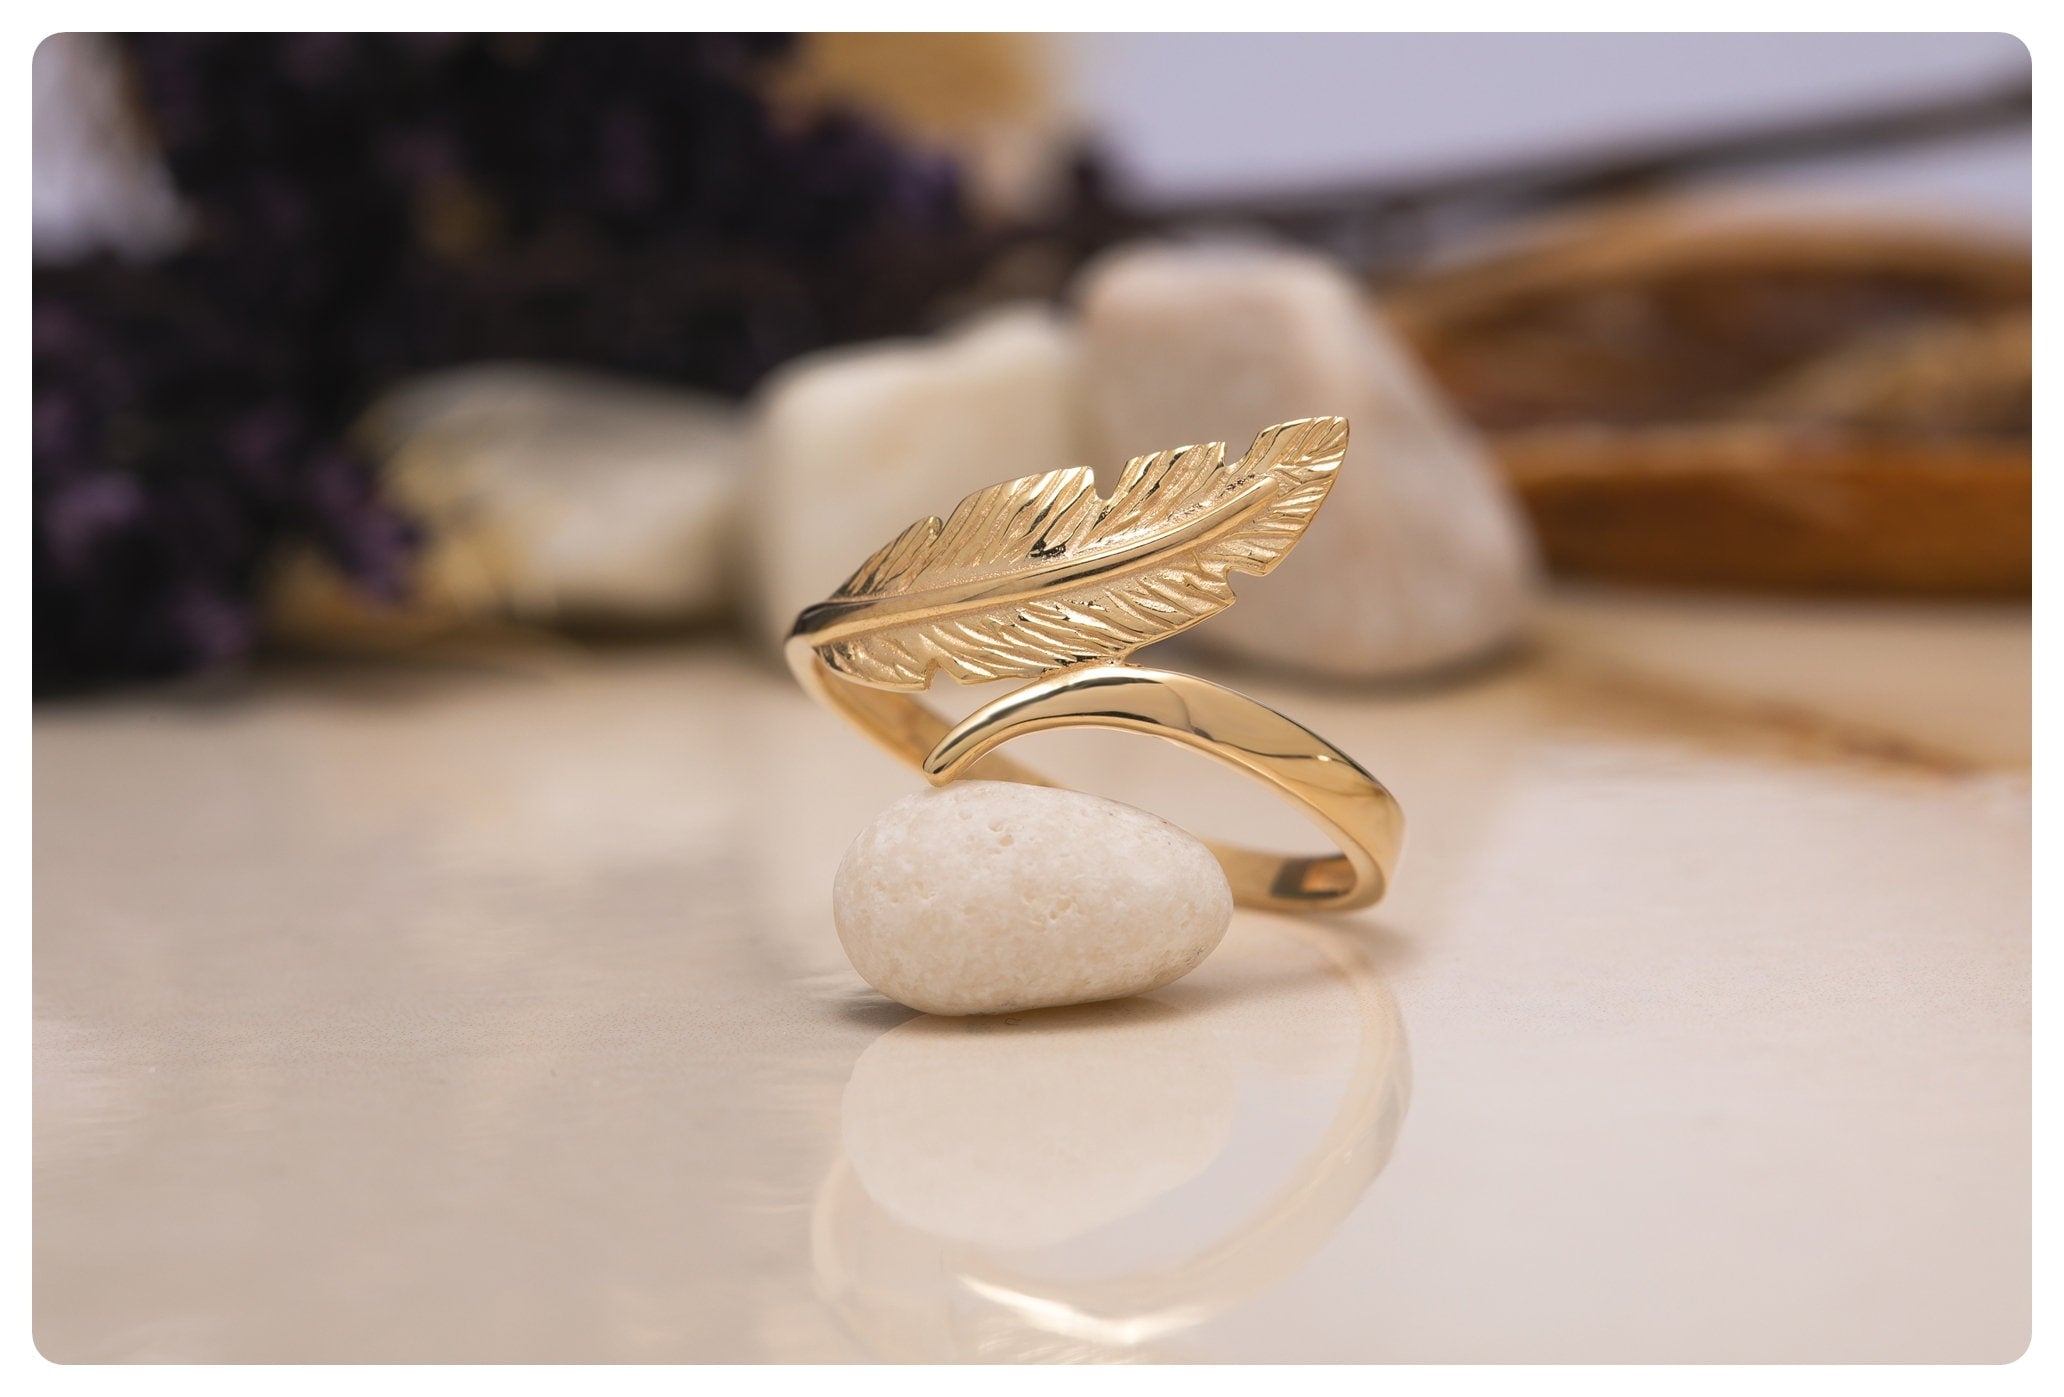 14K Gold Handmade Leaf Ring 925 Sterling Silver, Natural Jewelry, Stacking, Dainty Ring, Gift for Women, Gift Idea for the Anniversary